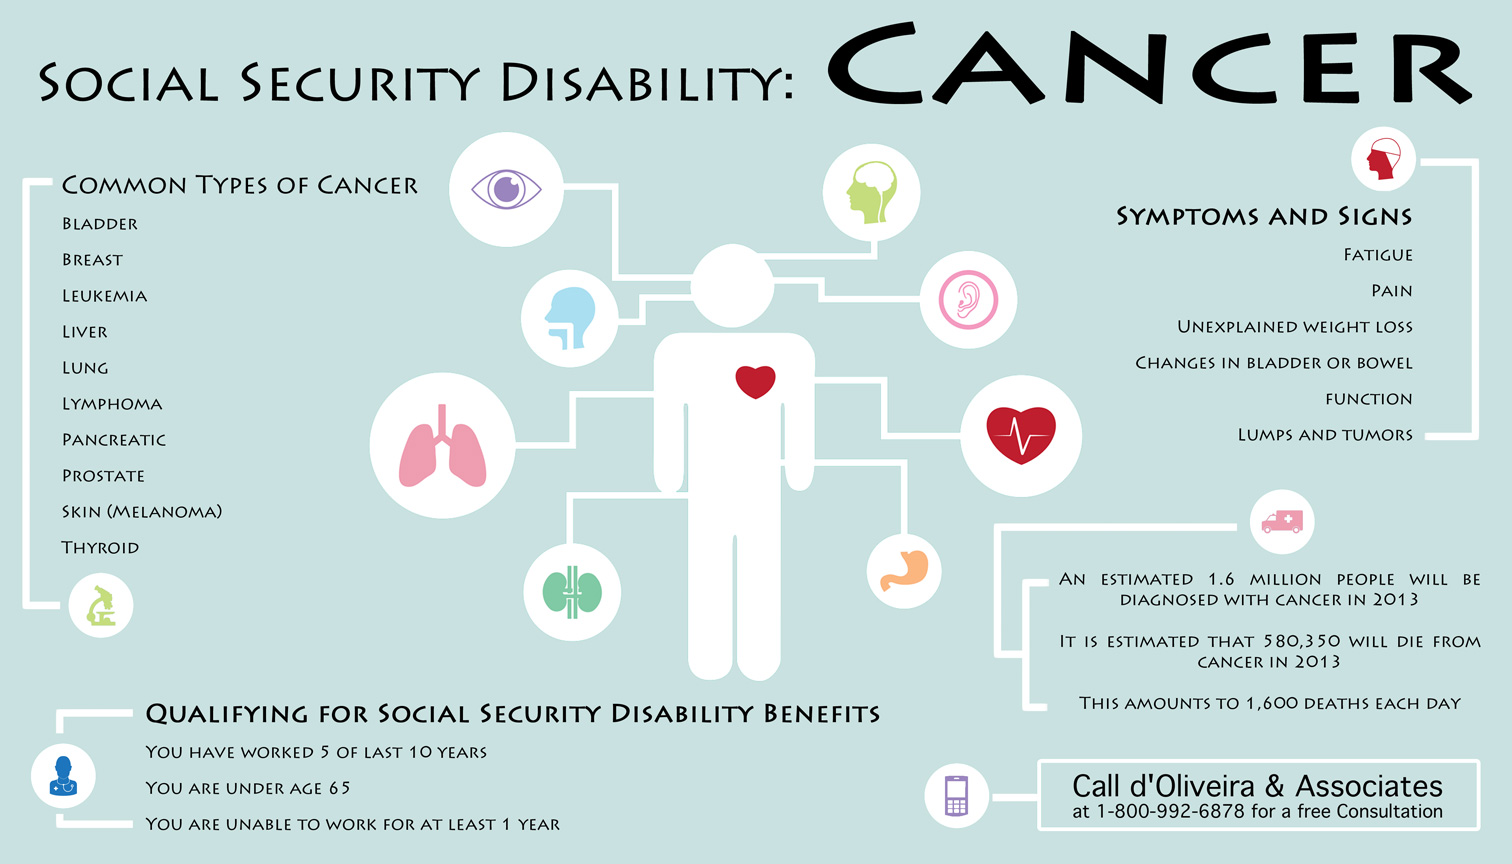 Social Security Disability and Cancer Infographic